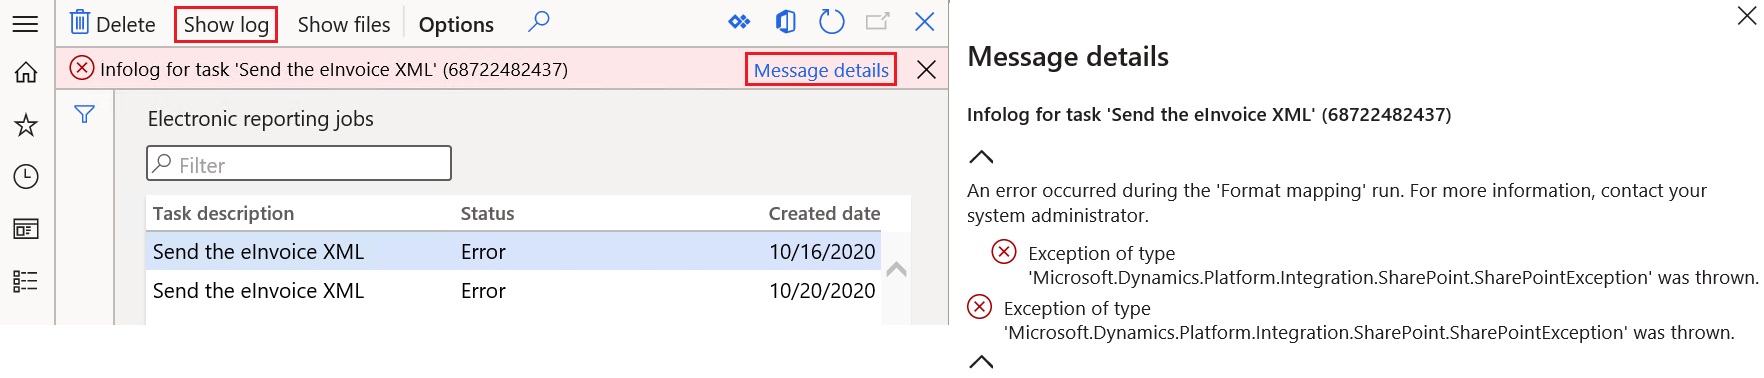 Viewing the message details for an error.